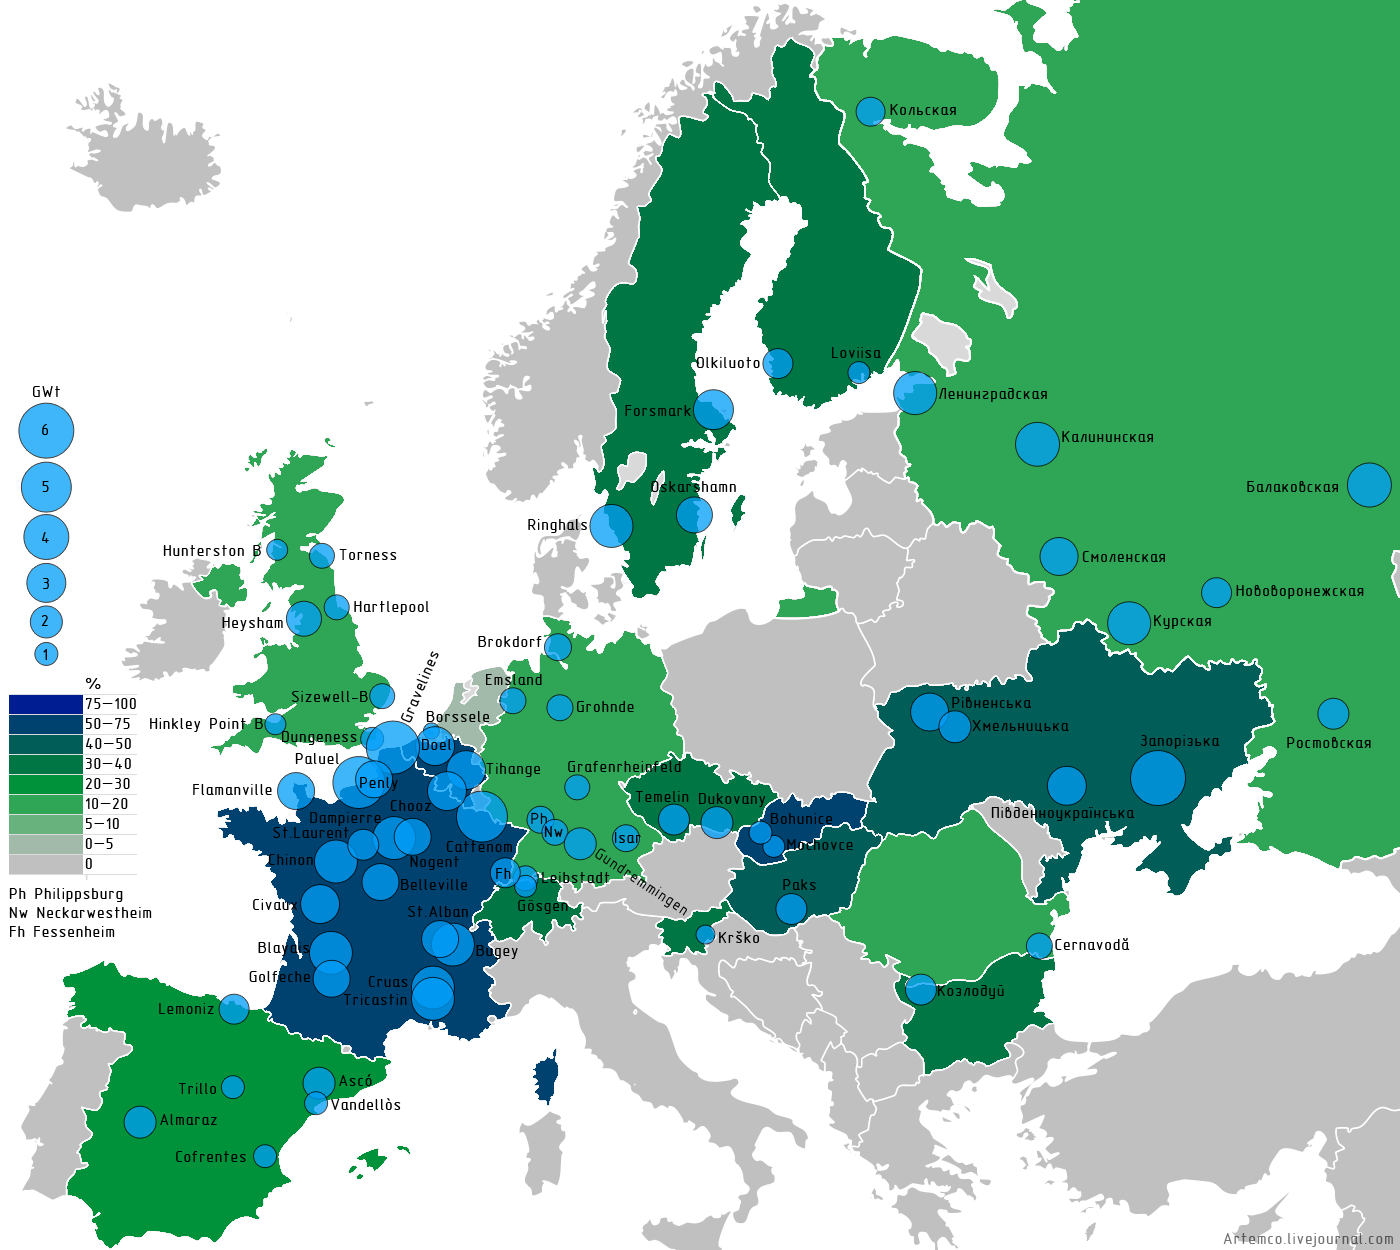 Nuclear power plants in Europe